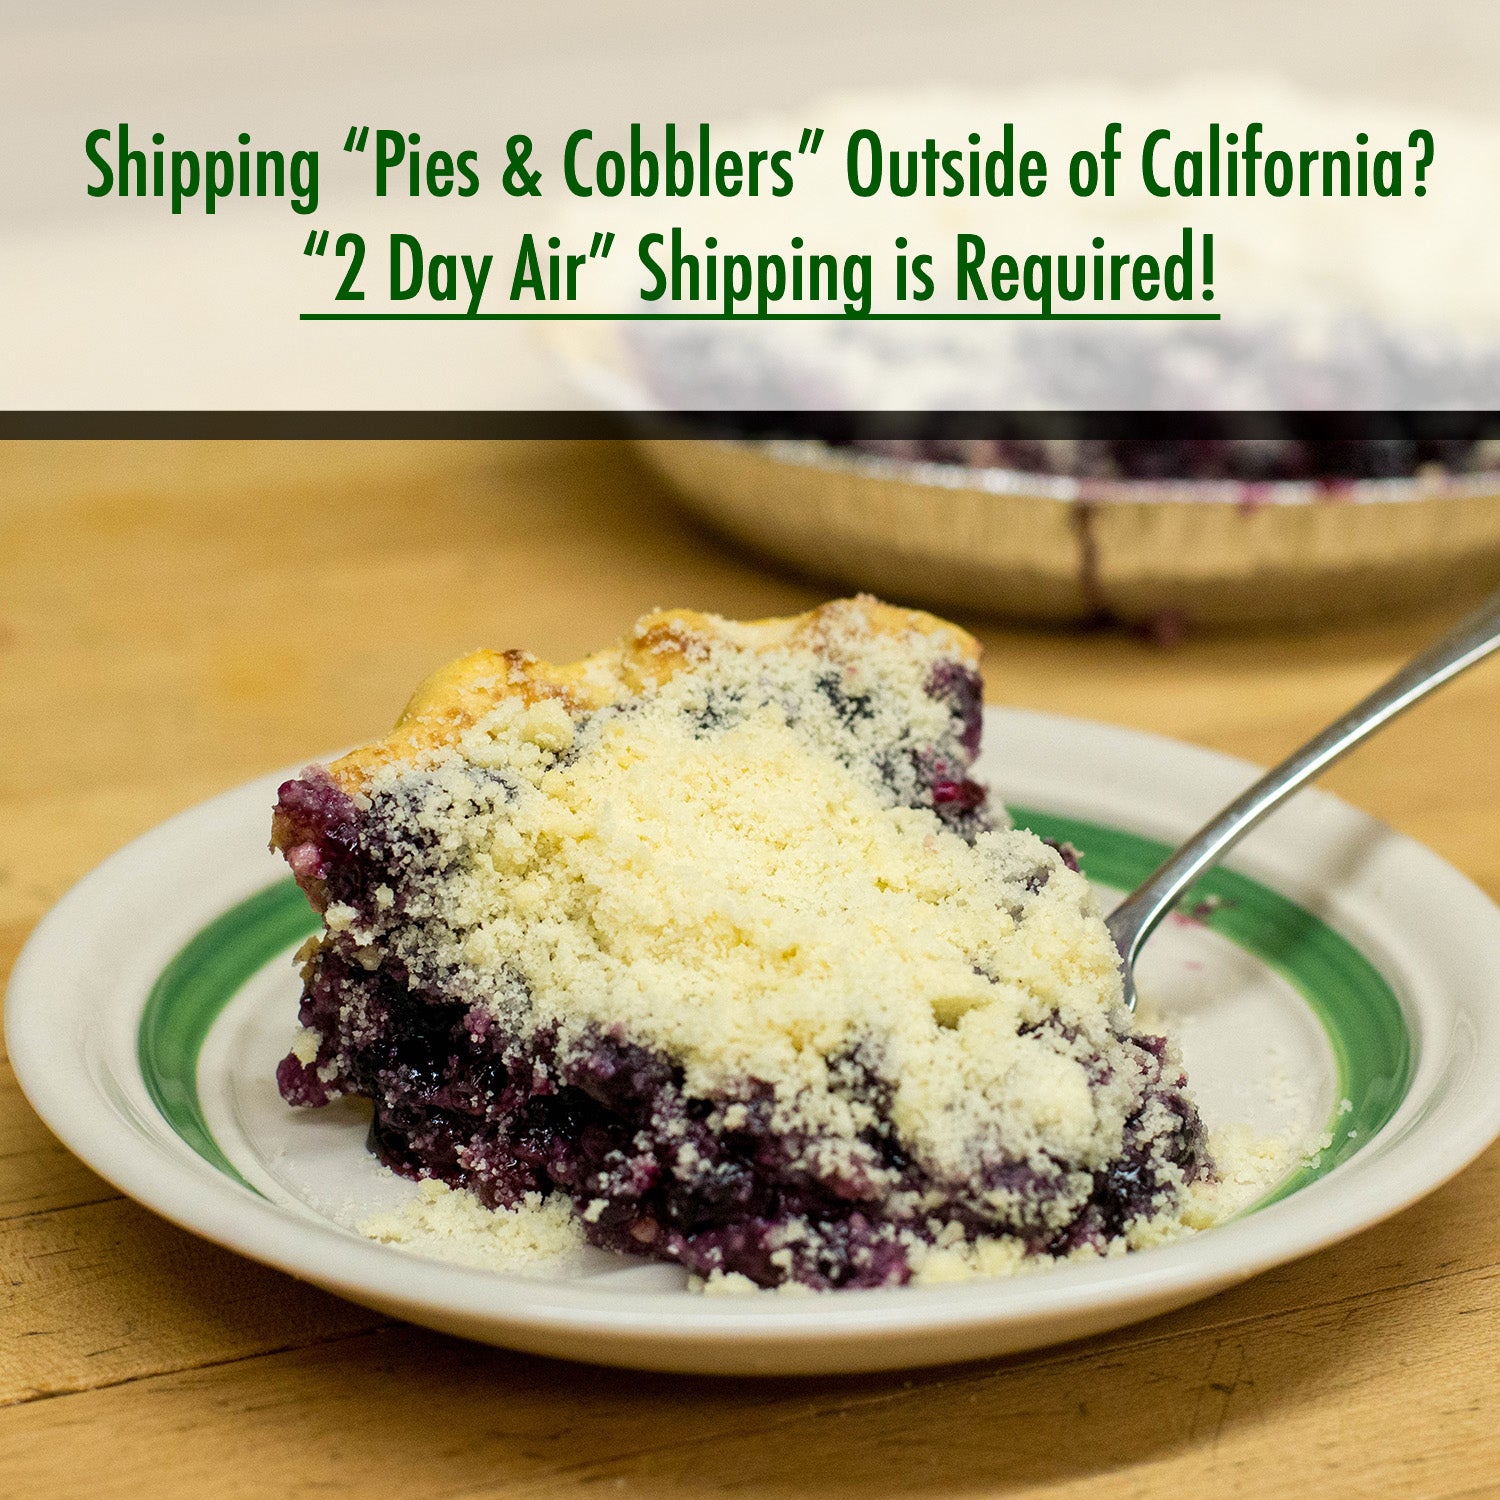 blueberry cobbler, if shipping outside of california, 2 day air shipping required